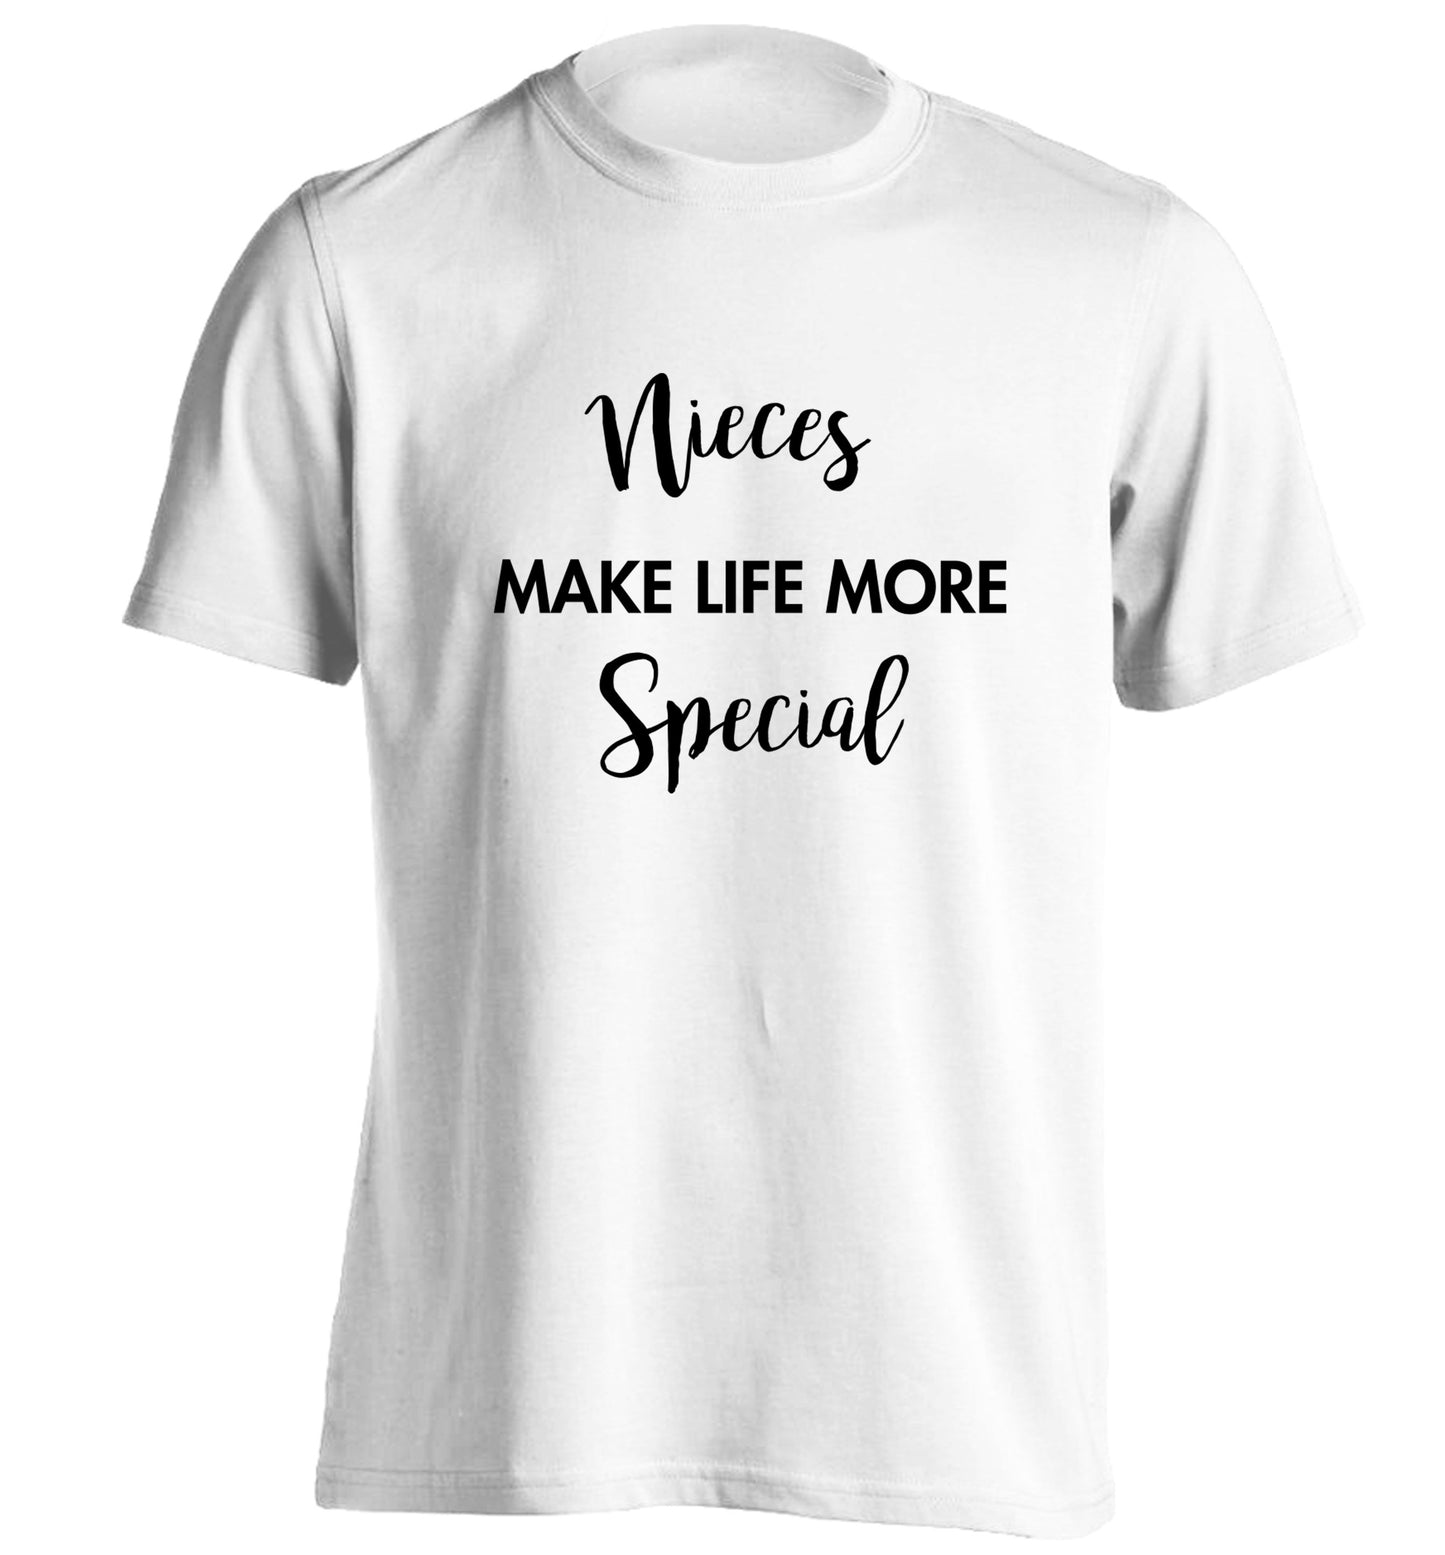 Nieces make life more special adults unisex white Tshirt 2XL